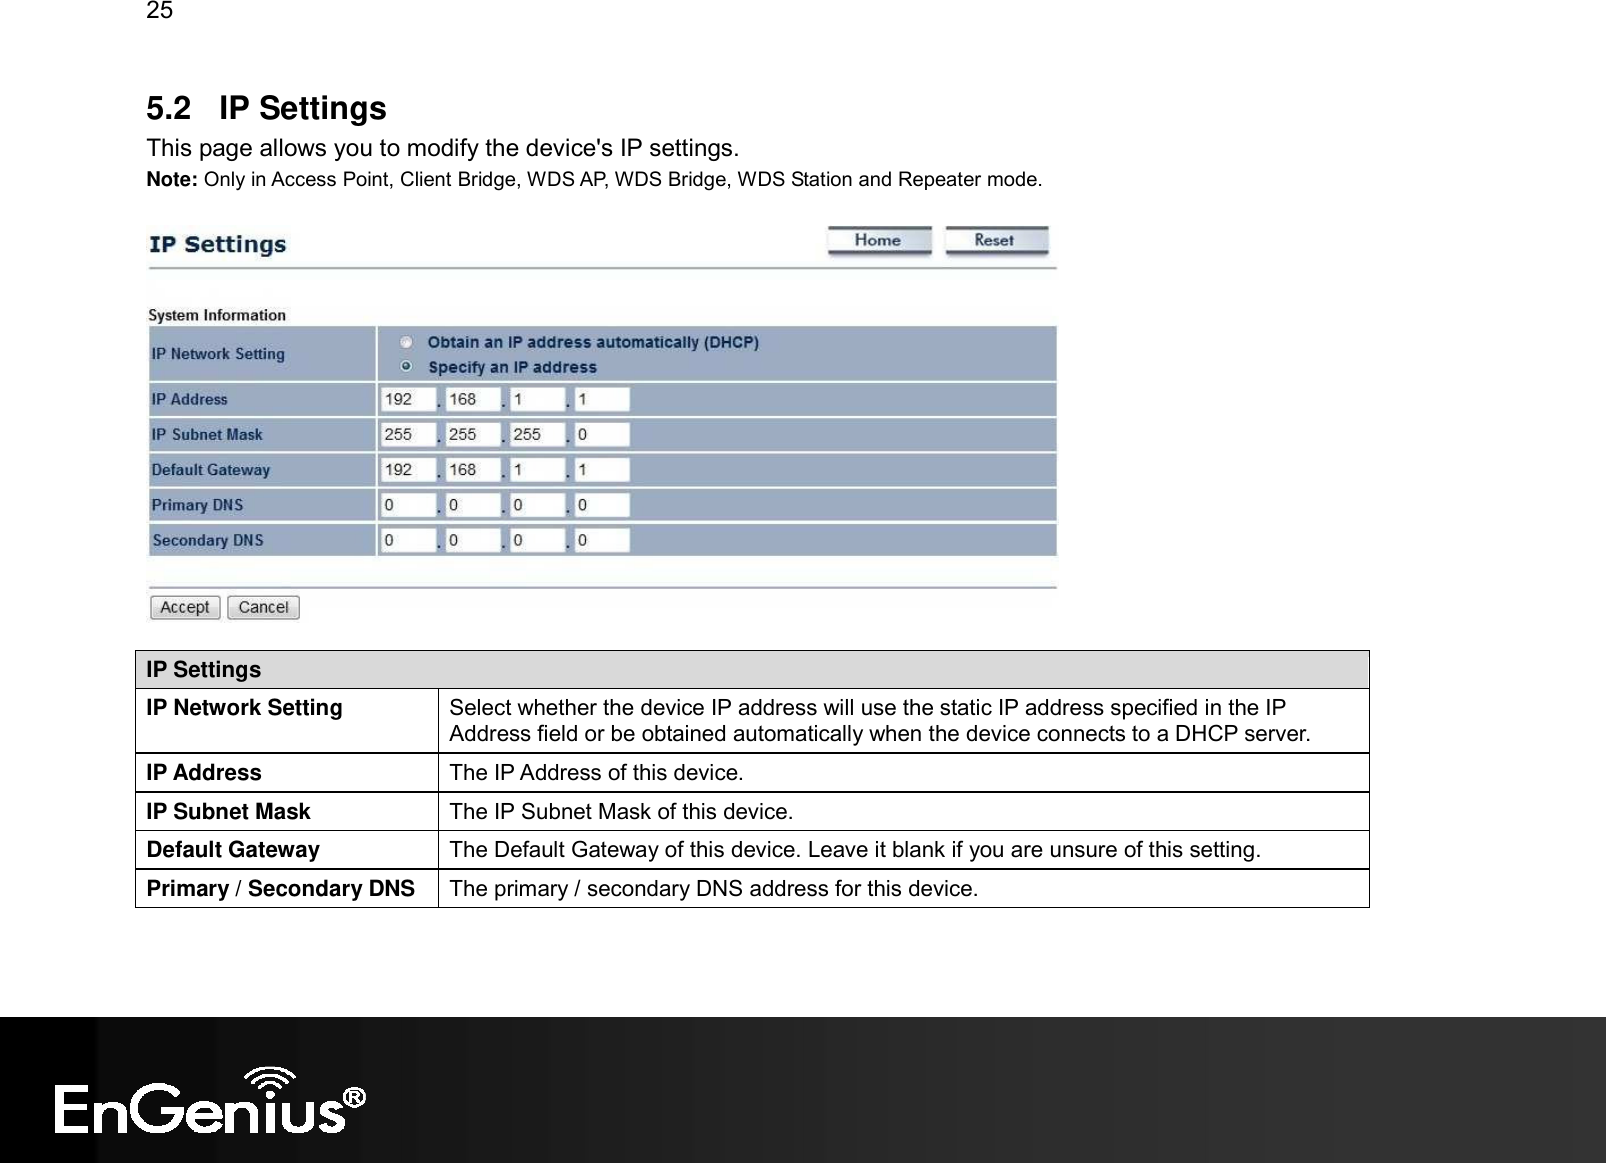 25  5.2  IP Settings This page allows you to modify the device&apos;s IP settings. Note: Only in Access Point, Client Bridge, WDS AP, WDS Bridge, WDS Station and Repeater mode.    IP Settings IP Network Setting  Select whether the device IP address will use the static IP address specified in the IP Address field or be obtained automatically when the device connects to a DHCP server. IP Address  The IP Address of this device. IP Subnet Mask  The IP Subnet Mask of this device. Default Gateway  The Default Gateway of this device. Leave it blank if you are unsure of this setting. Primary / Secondary DNS  The primary / secondary DNS address for this device.  